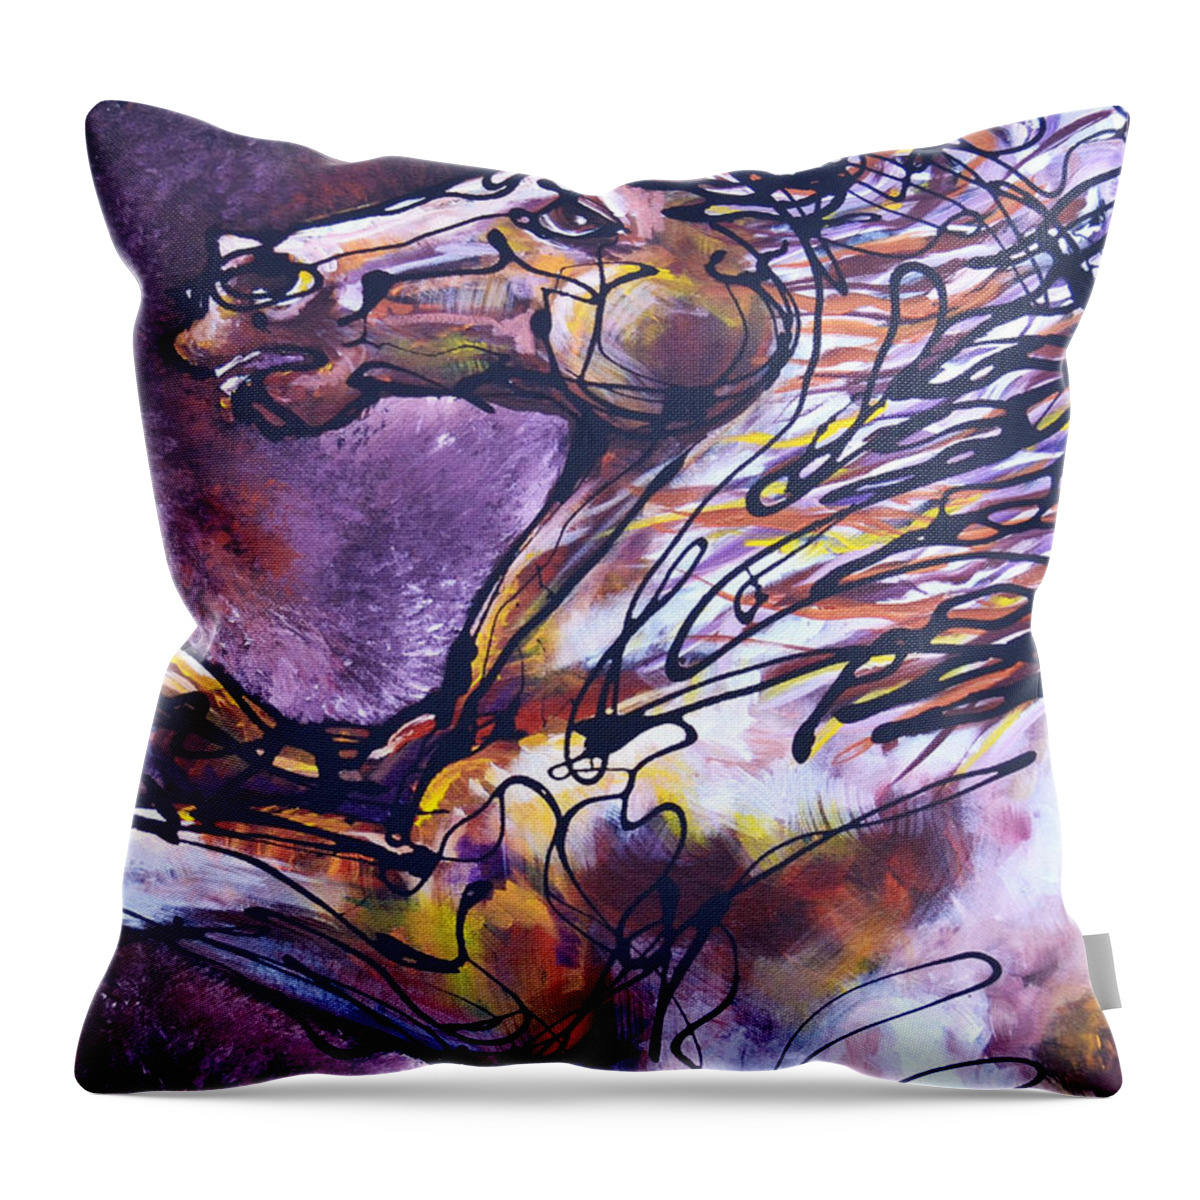 Horse Throw Pillow featuring the painting Tension by Jonelle T McCoy